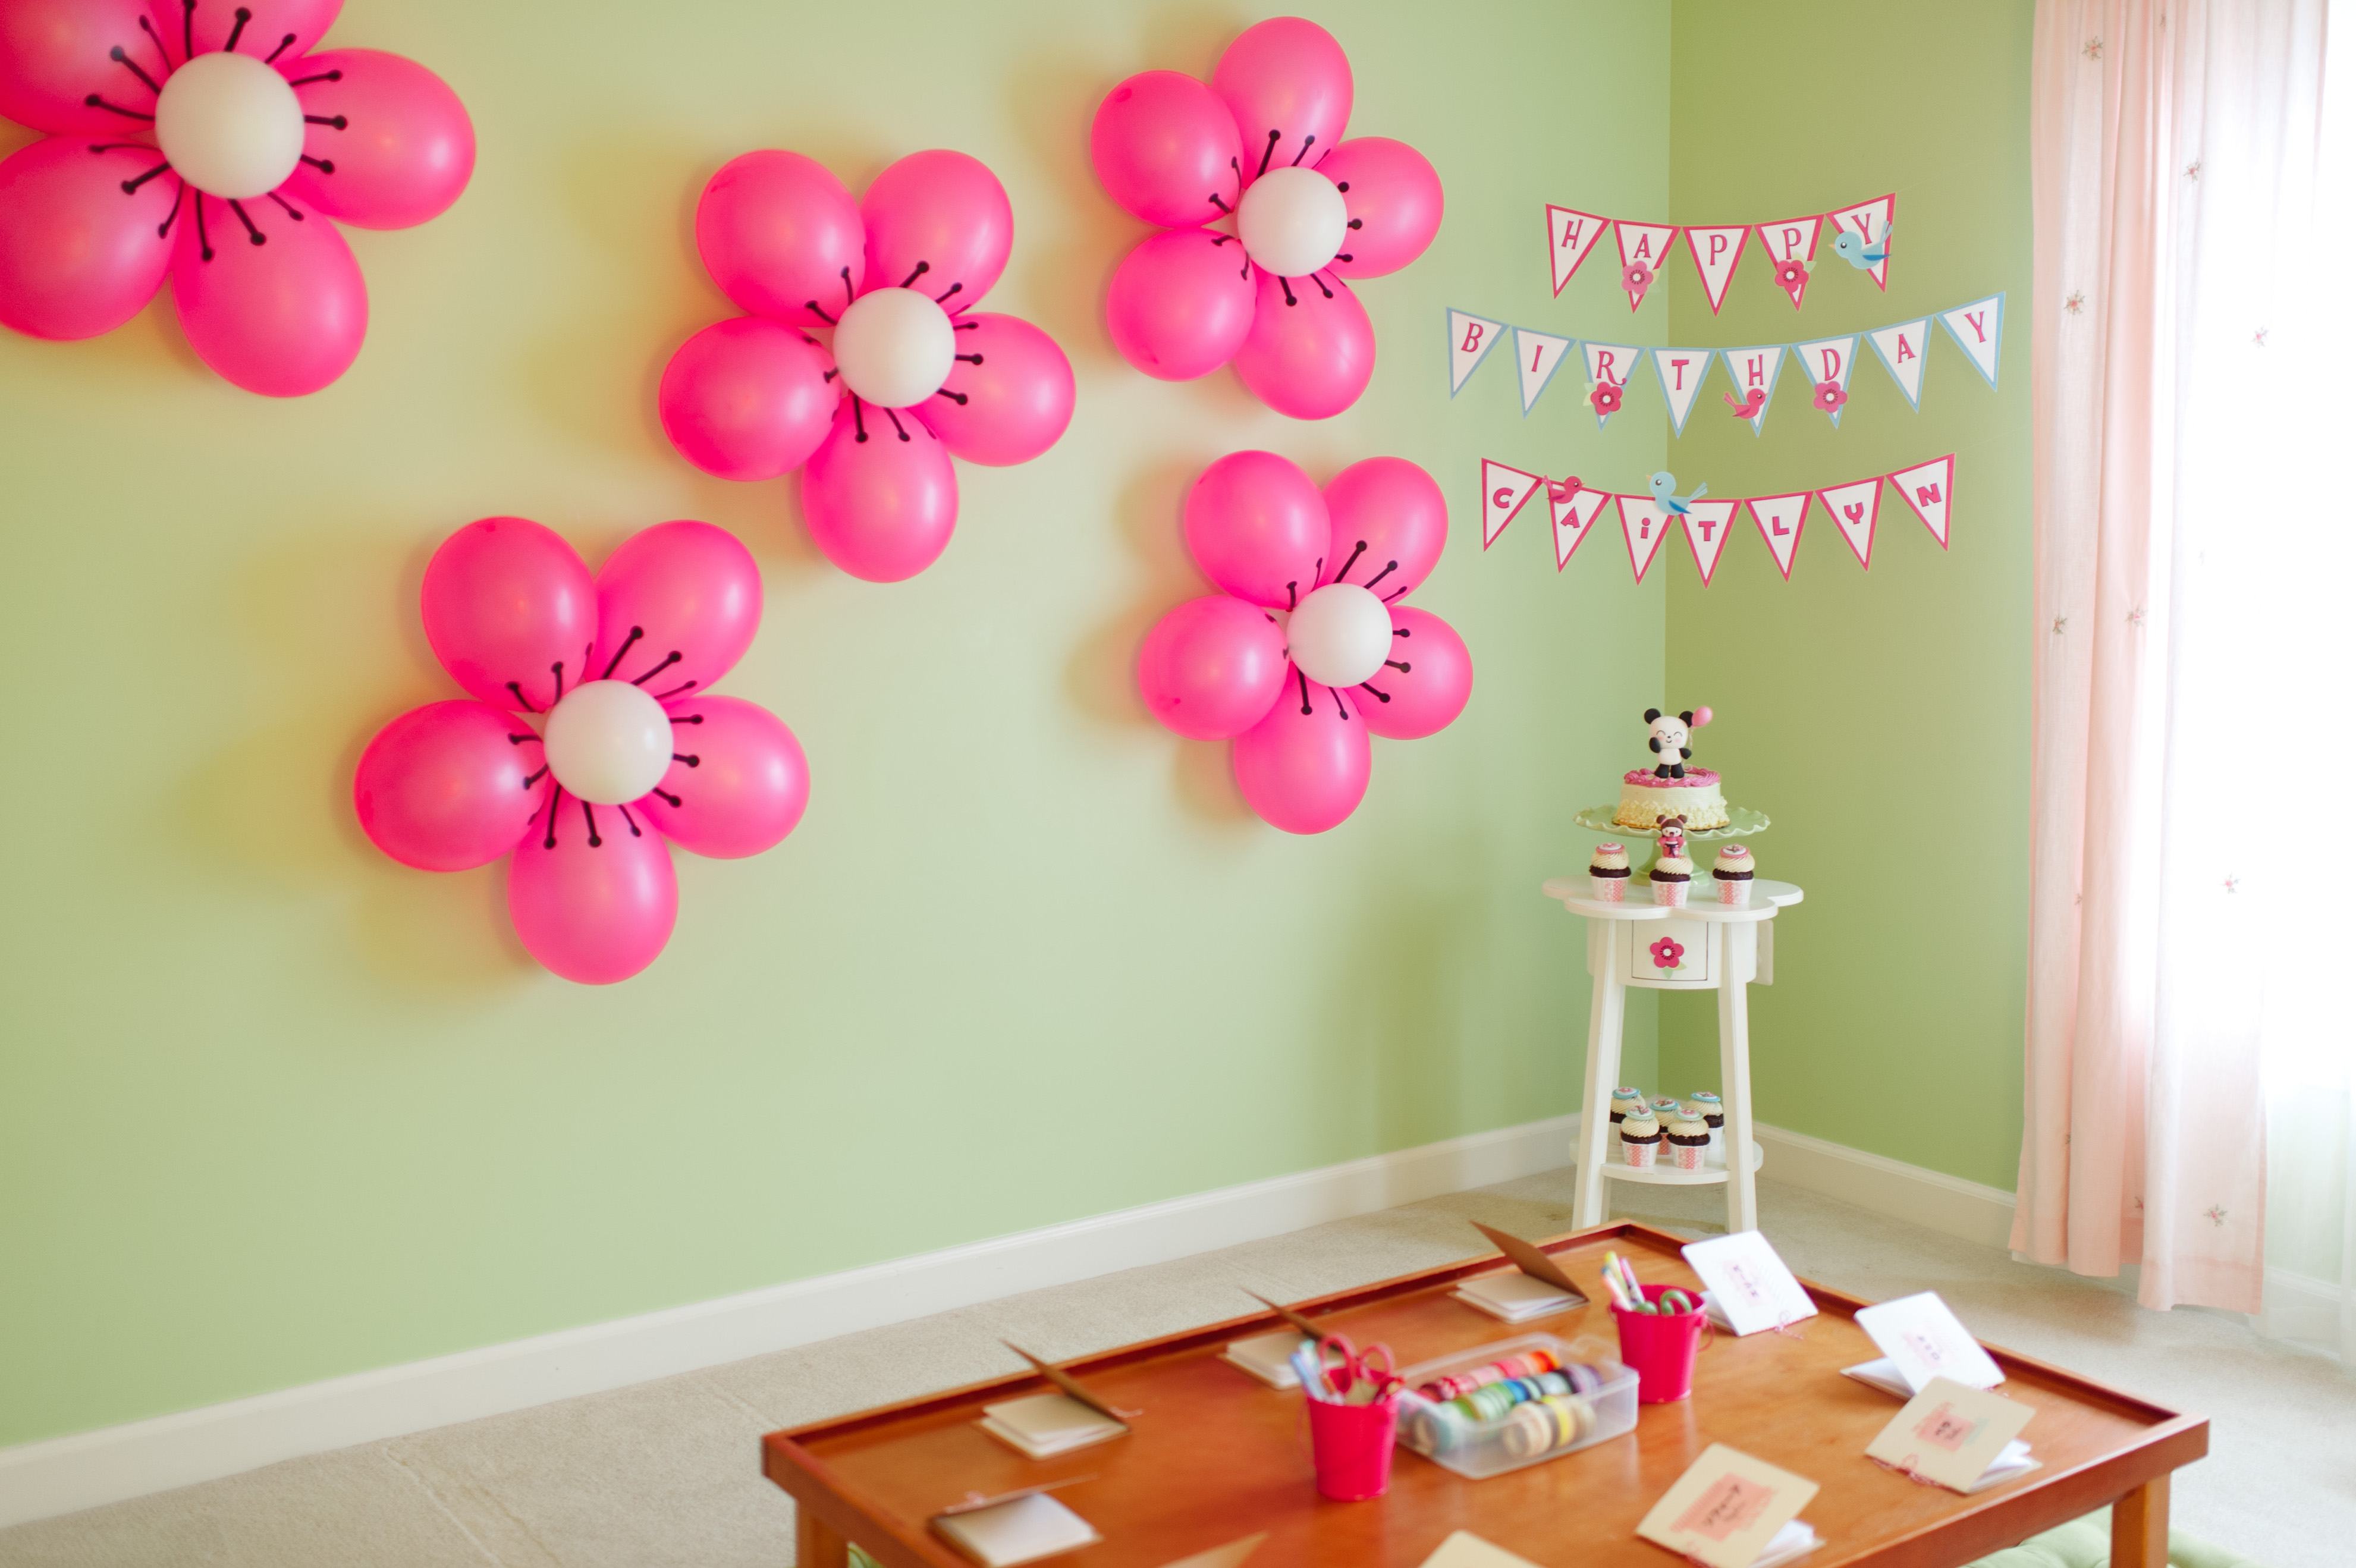 simple-balloon-decorations-birthday-party_323097 (1)